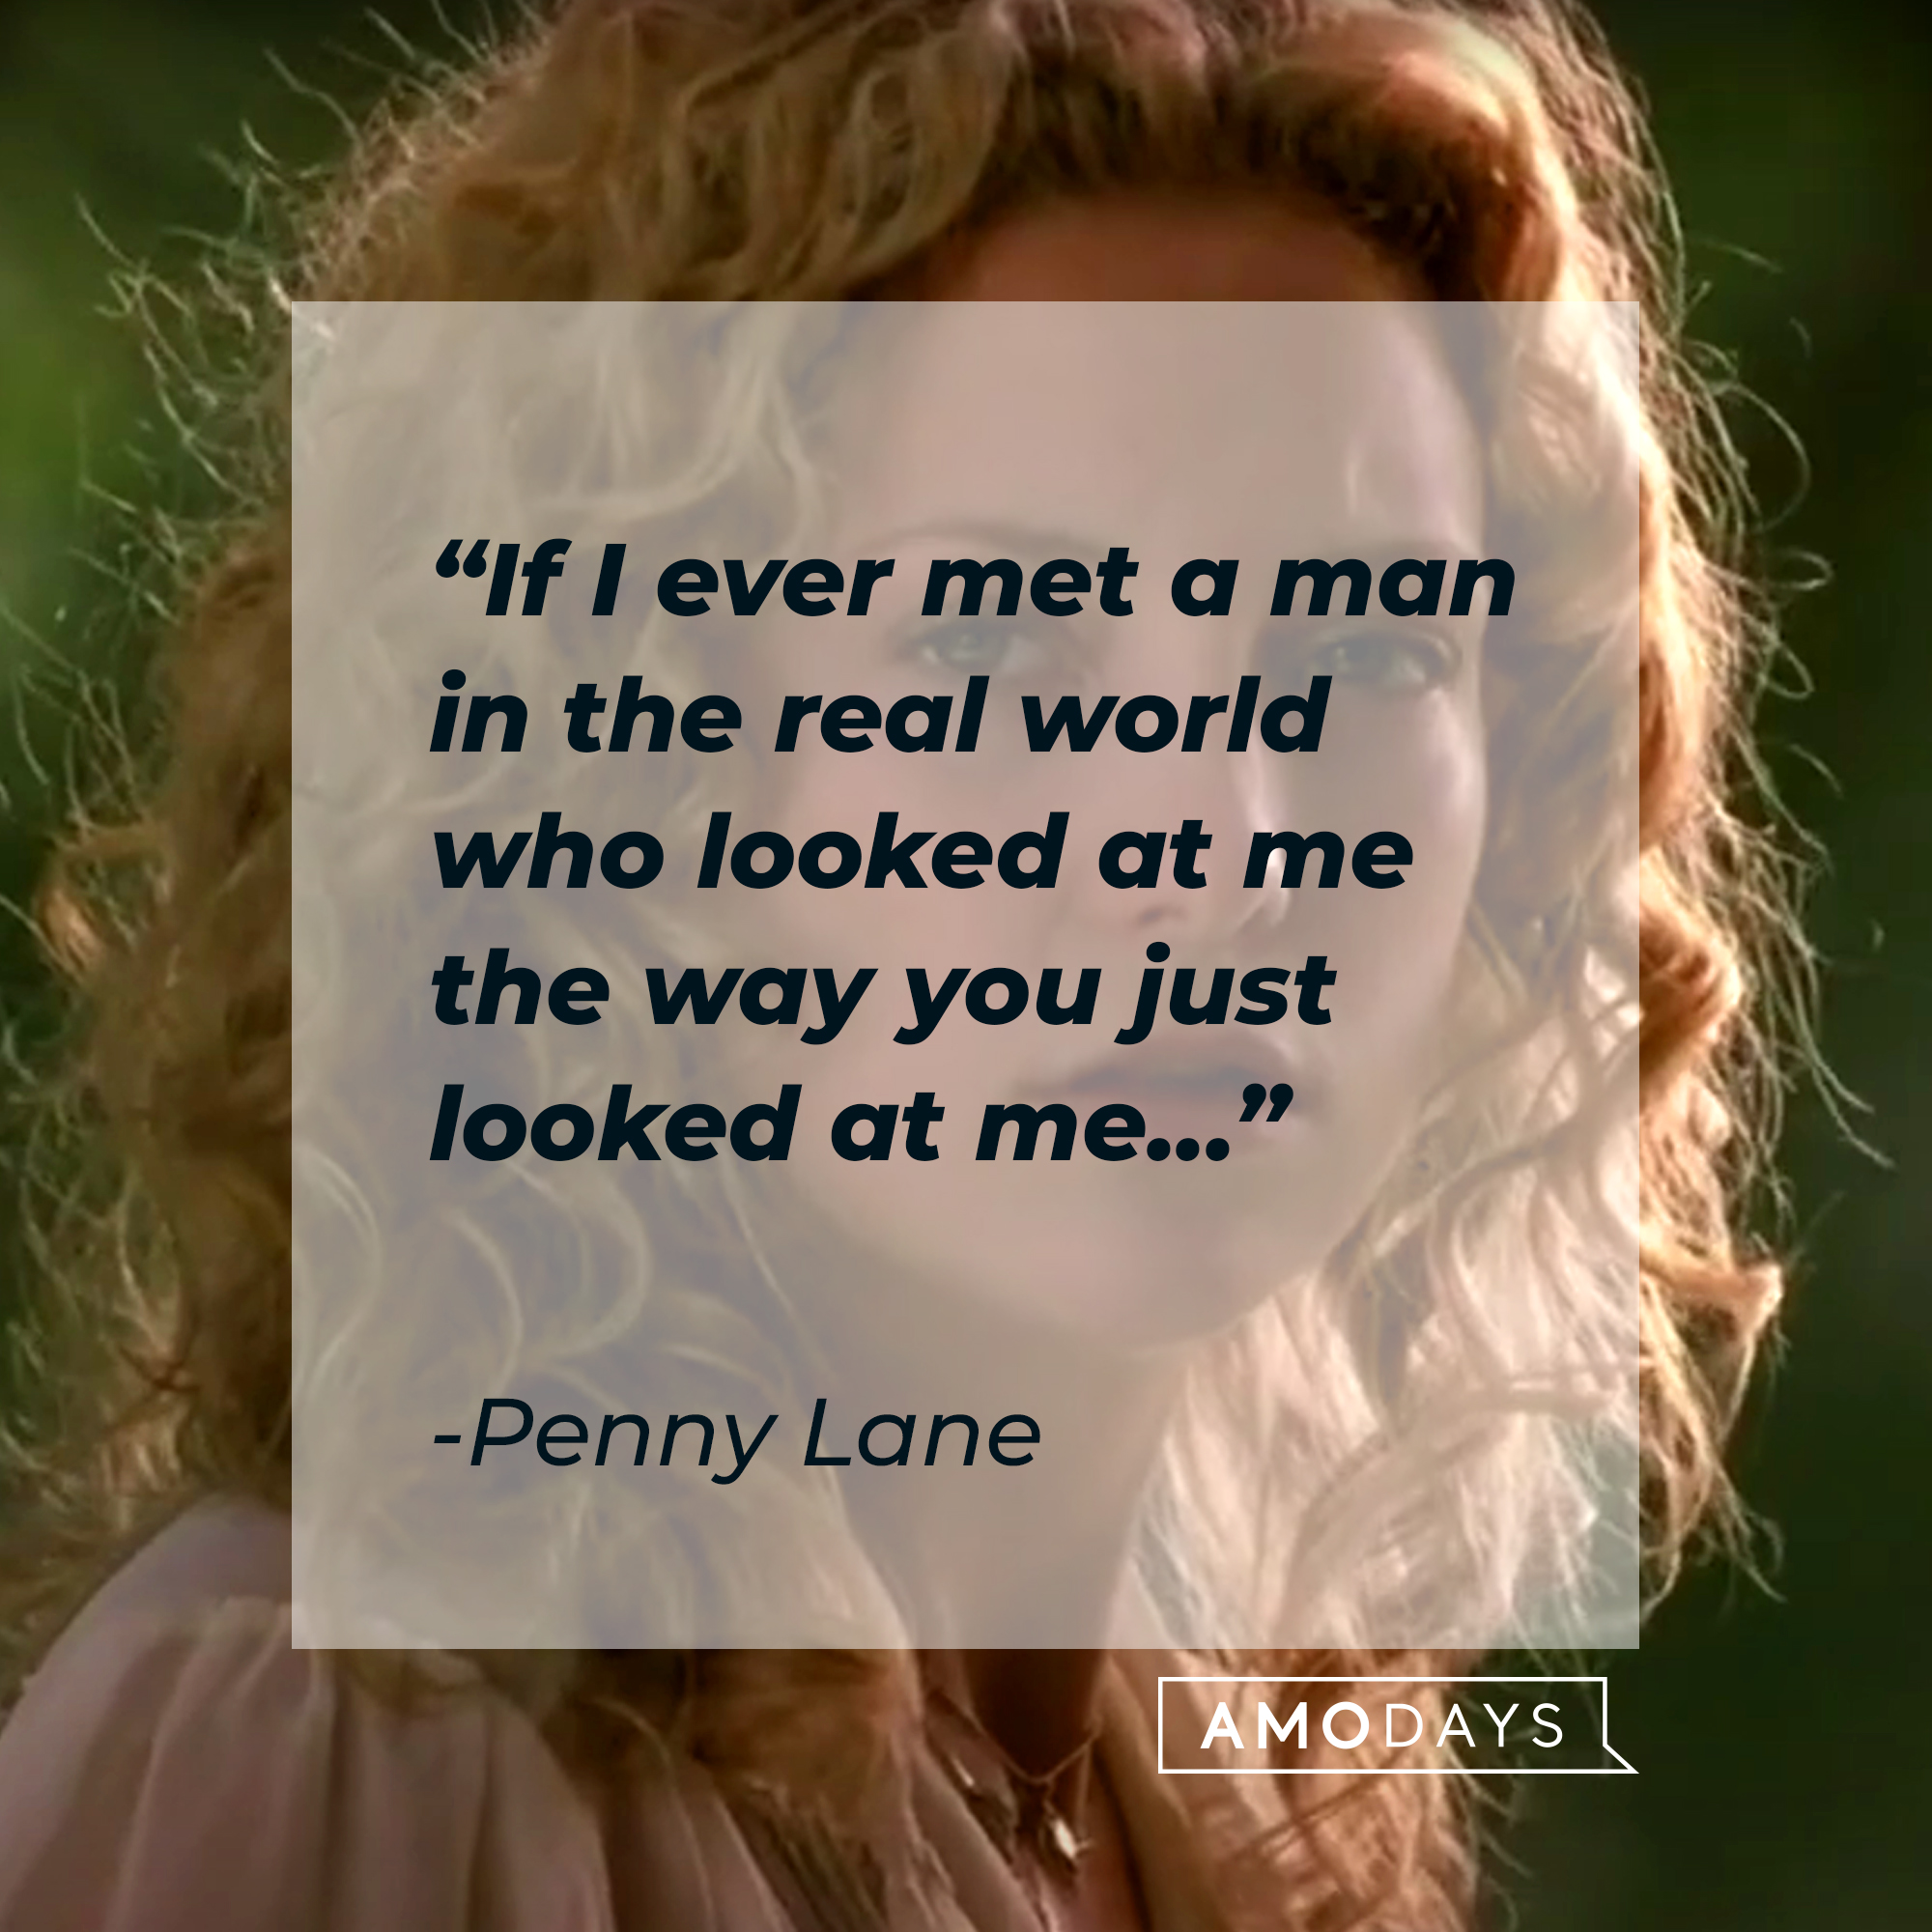 Penny Lane's quote: “If I ever met a man in the real world who looked at me the way you just looked at me…” | Source: facebook.com/AlmostFamousTheMovie